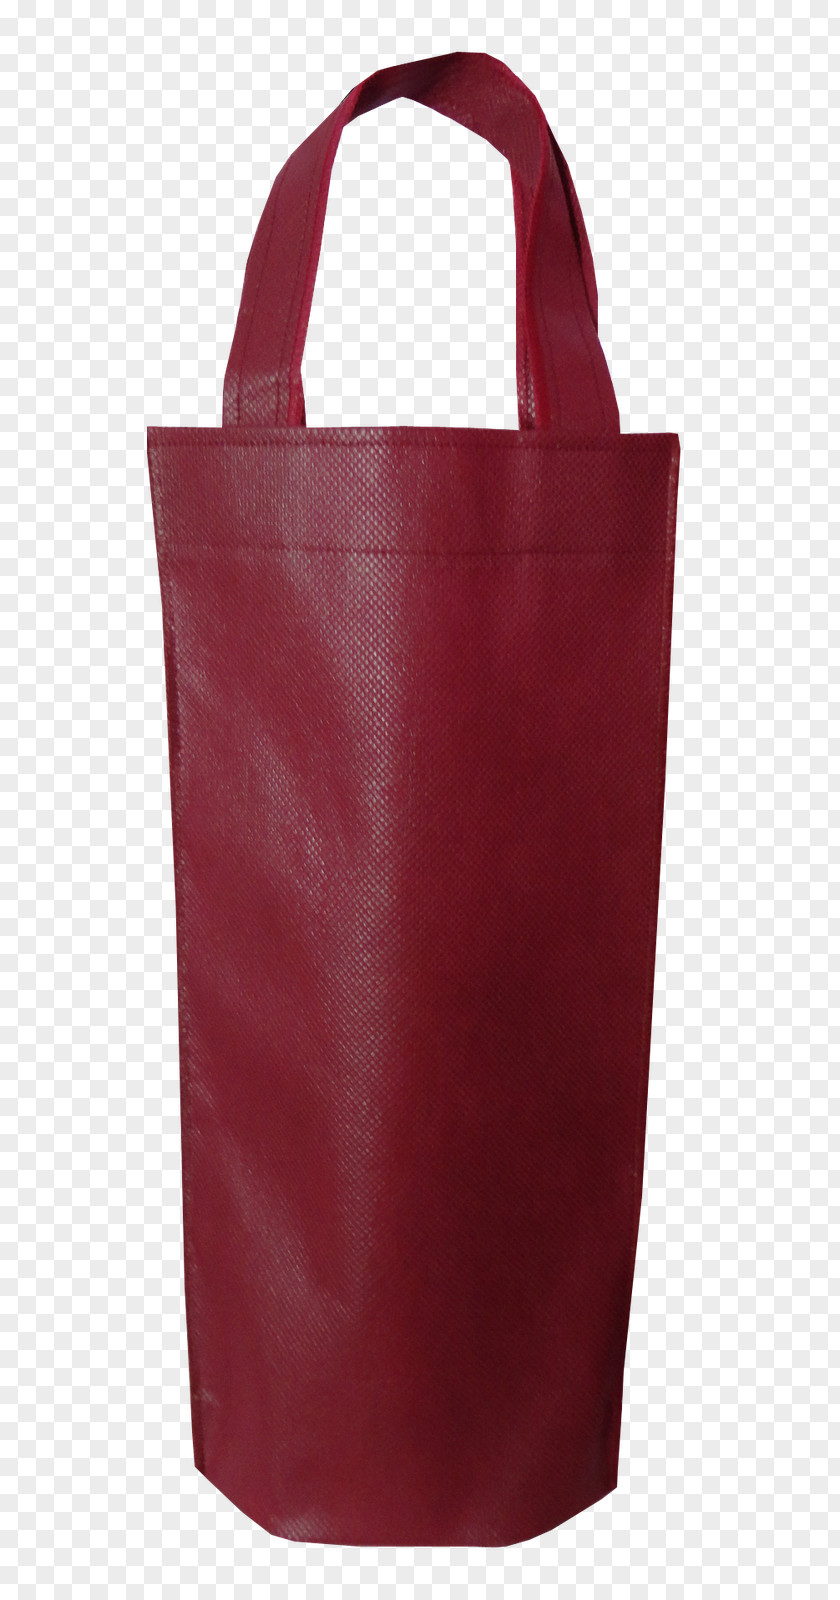 Bag Tote Reusable Shopping Bags & Trolleys Packaging And Labeling PNG